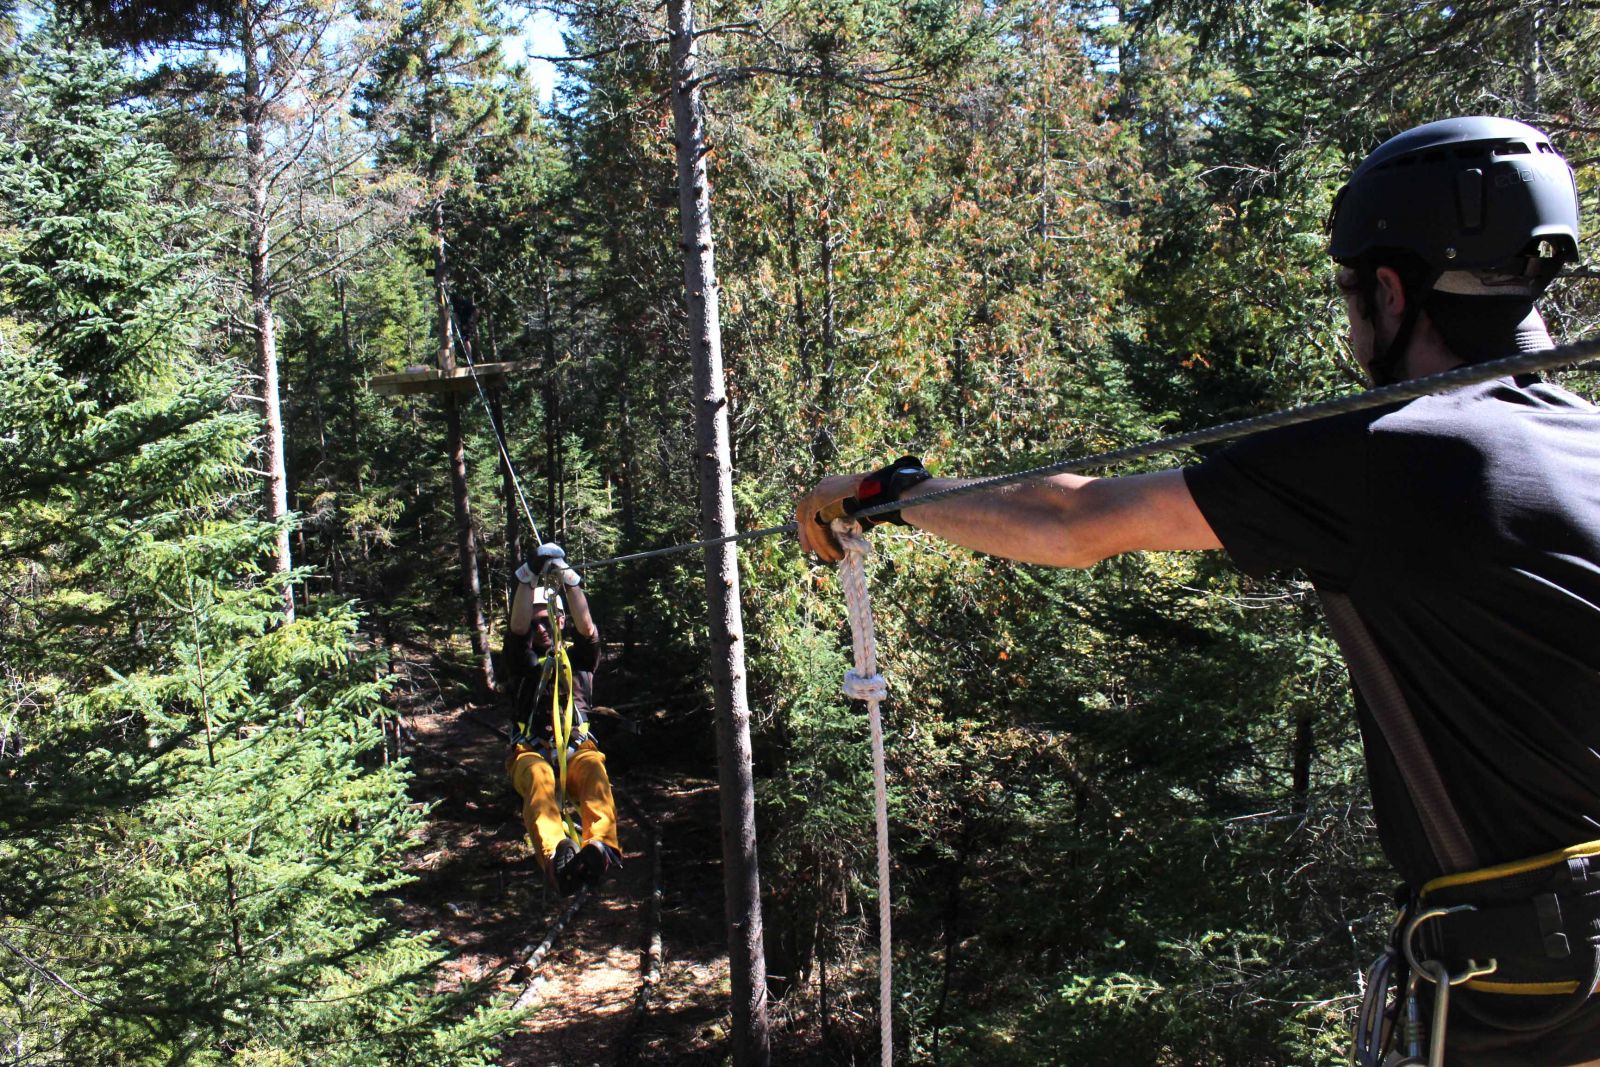 Zip lines provide a smooth ride through the treetops.